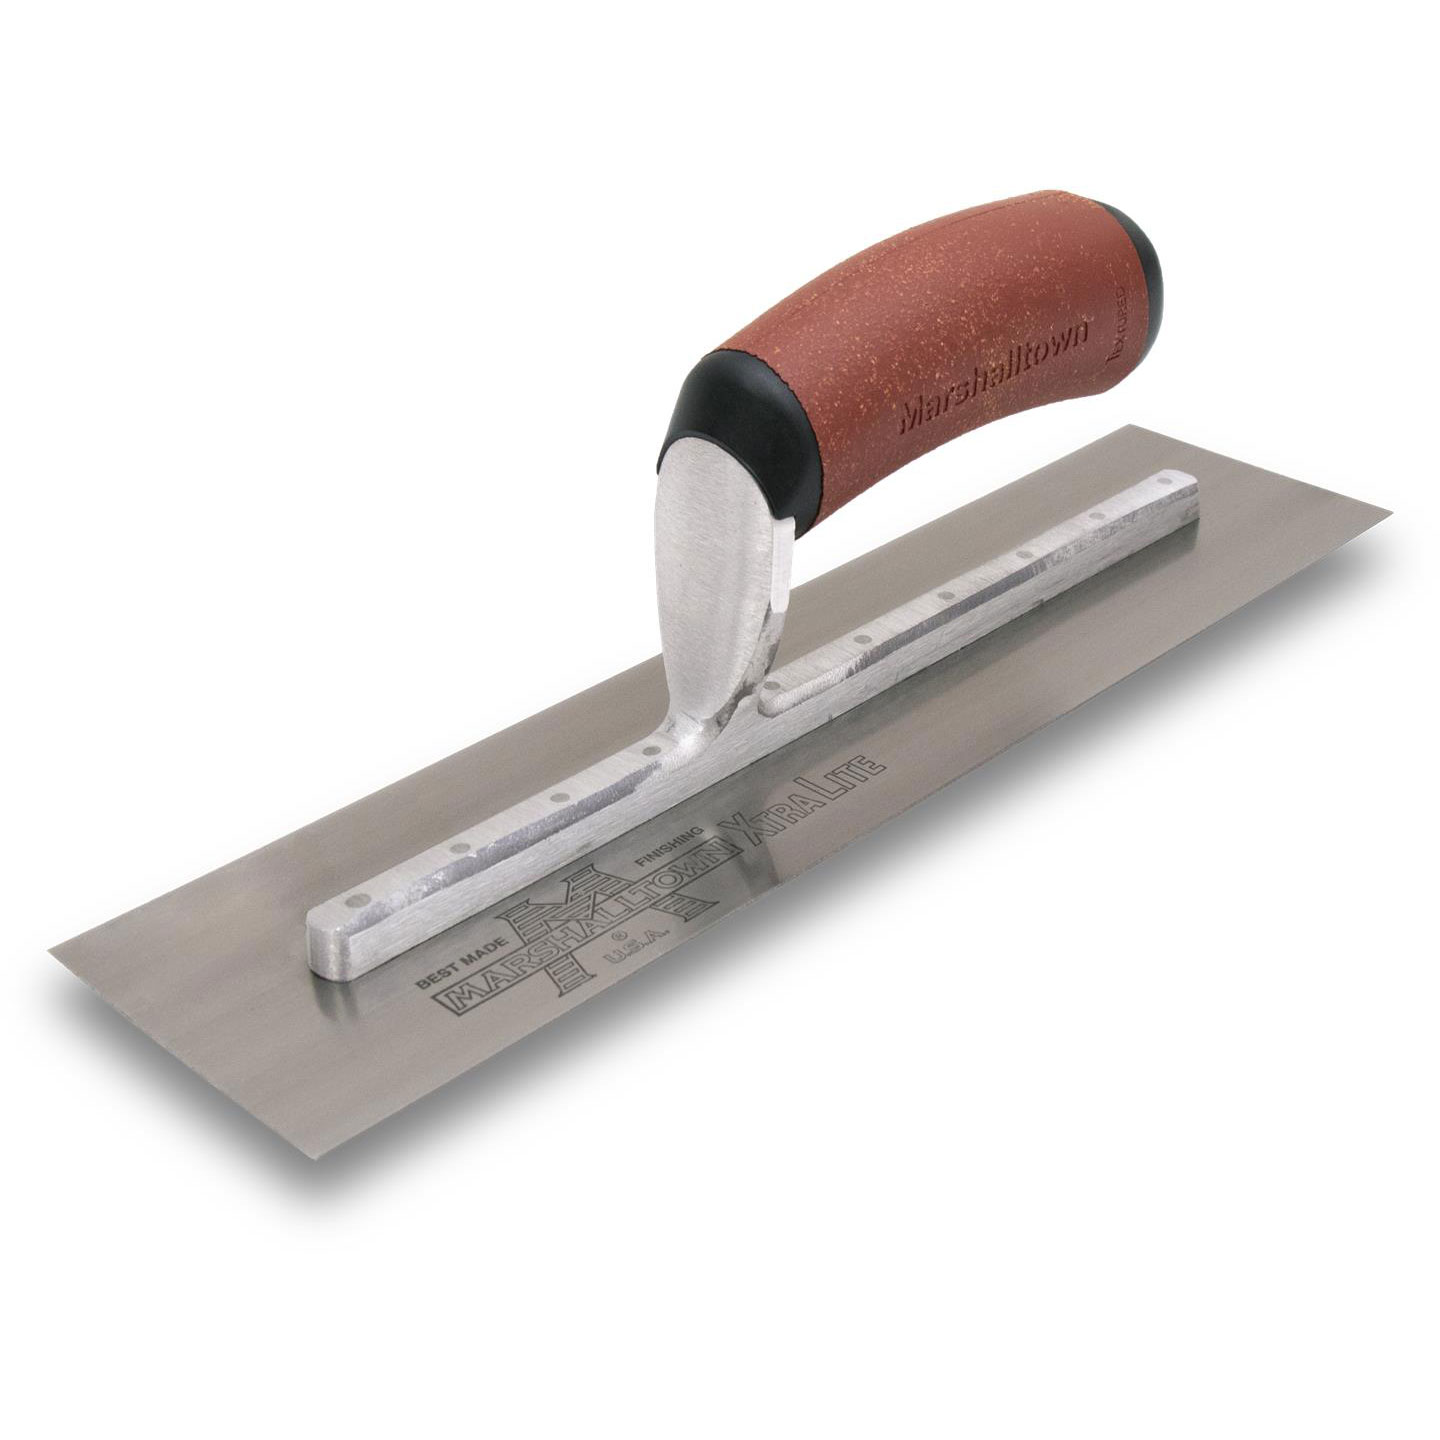 Marshalltown MXS62SSDC 12in x 4in Stainless Finishing Trowel with DuraCork Handle MXS62SSDC